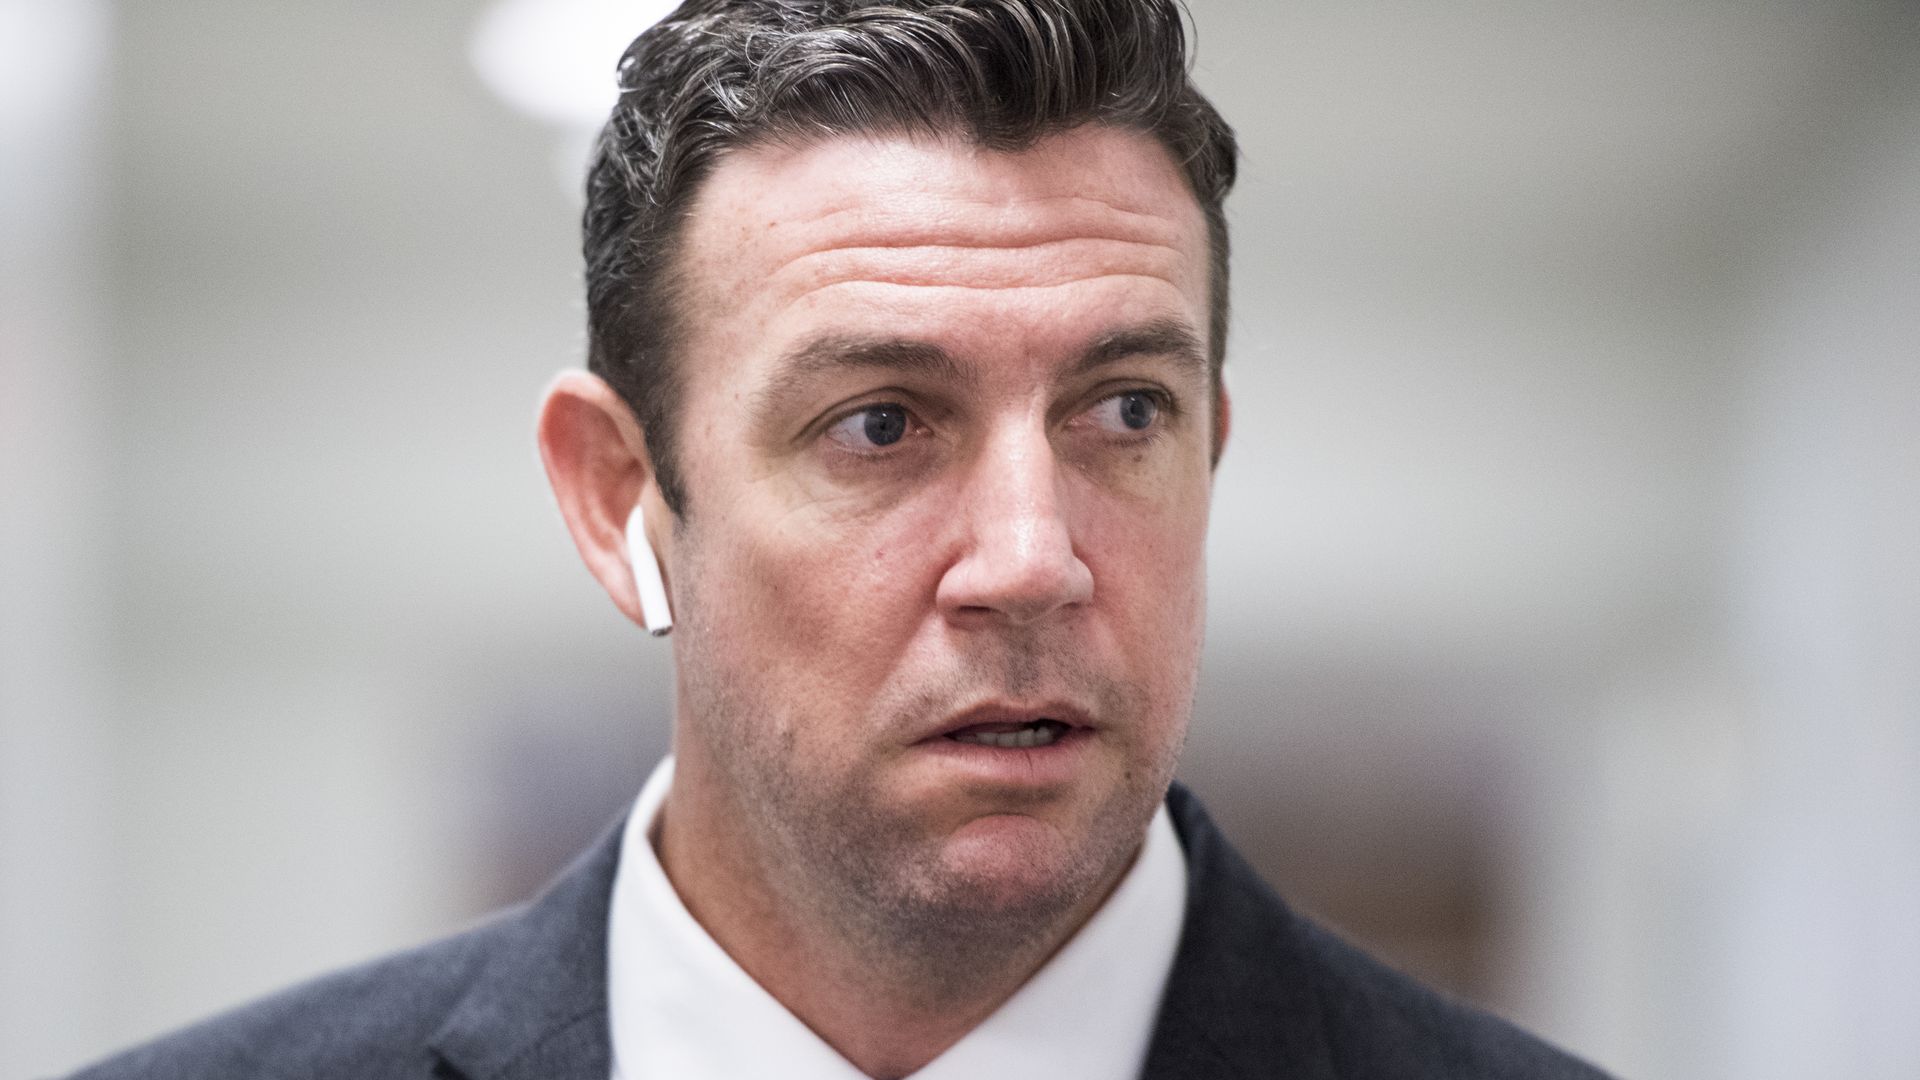 In this image, Duncan Hunter wears a suit and Airpods and walks down a hall.